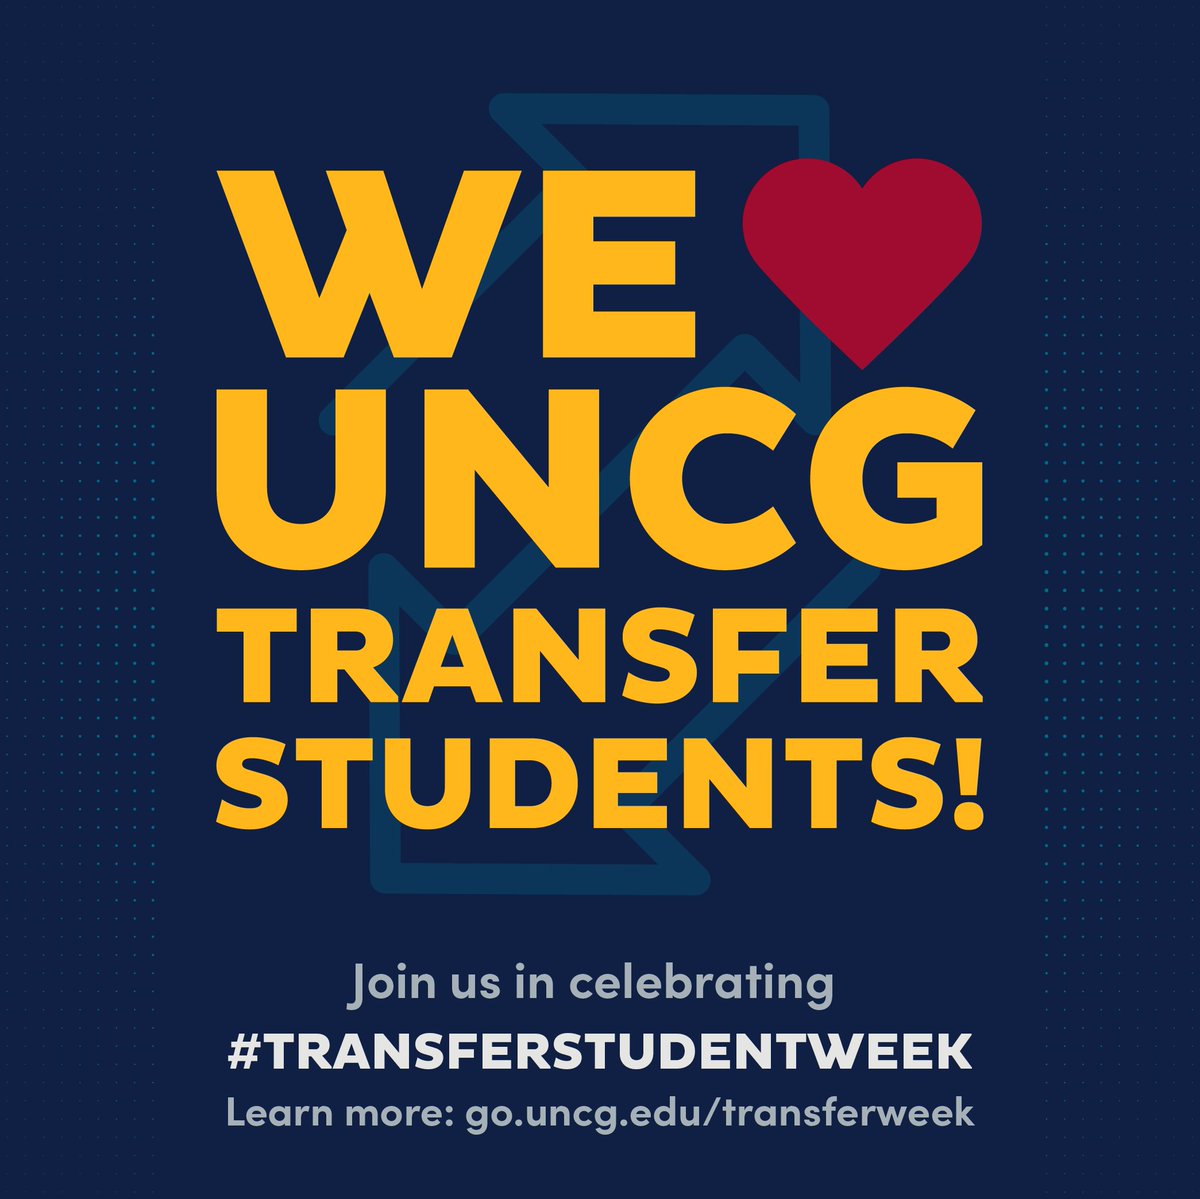 It's National Transfer Week and we LOVE our Transfer Students! We would be THRILLED to partner with you and have your students join our Spartan Family! Let us know if you are interested! To get started, go here! go.uncg.edu/transferweek  @_gtcc @waketechcc @ForsythTechCC  @uncghhs